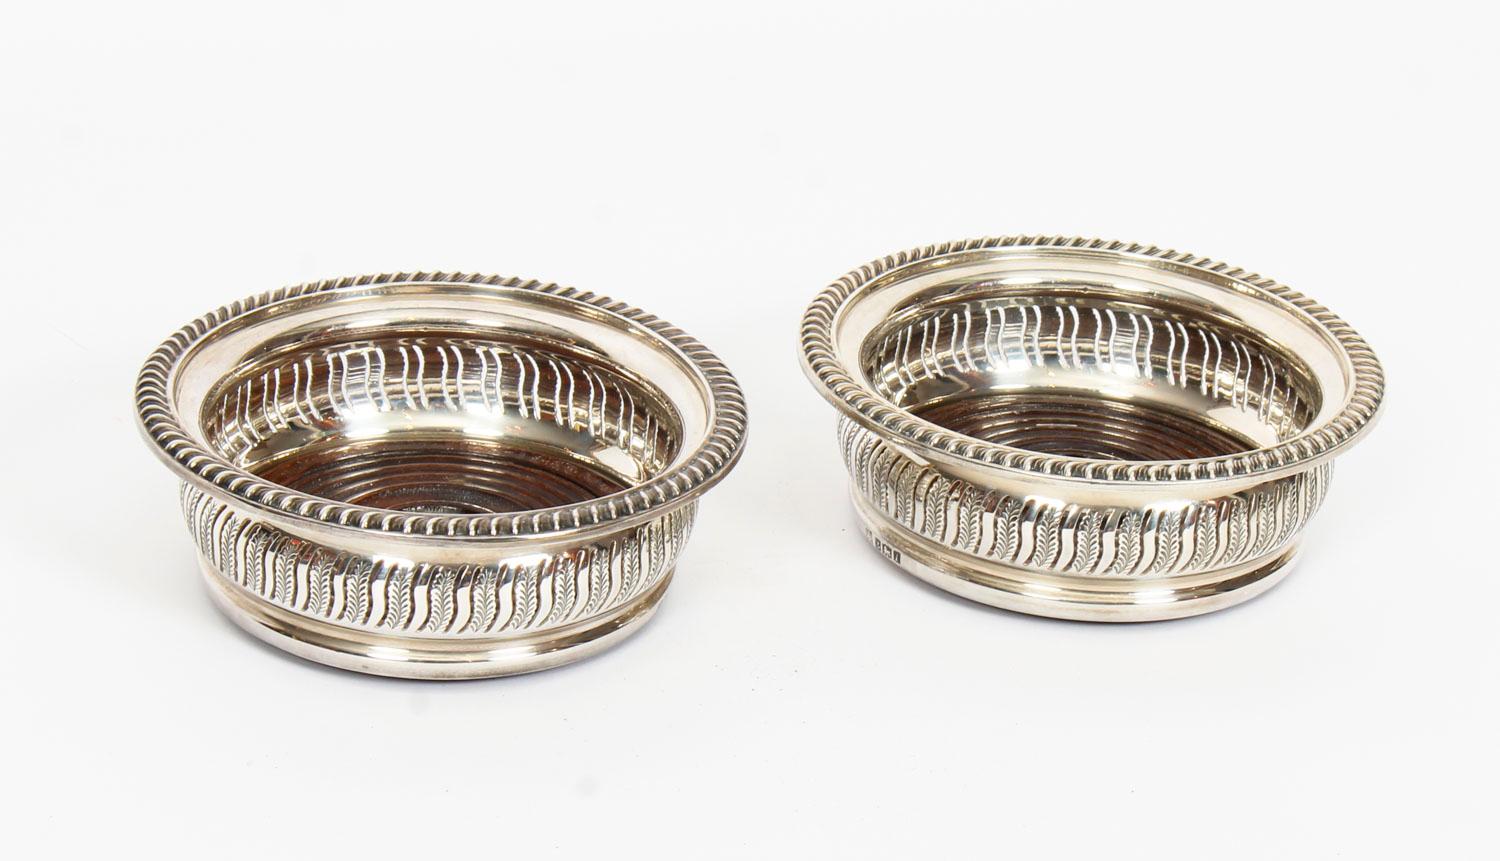 A superb pair of mid-20th century sterling silver wine coasters, by the Barker Ellis Silver Co, Birmingham, 1968.

Of circular form with pierced fern decoration, gadroon borders and turned wooden bases with plain buttons.
Provenance:

James